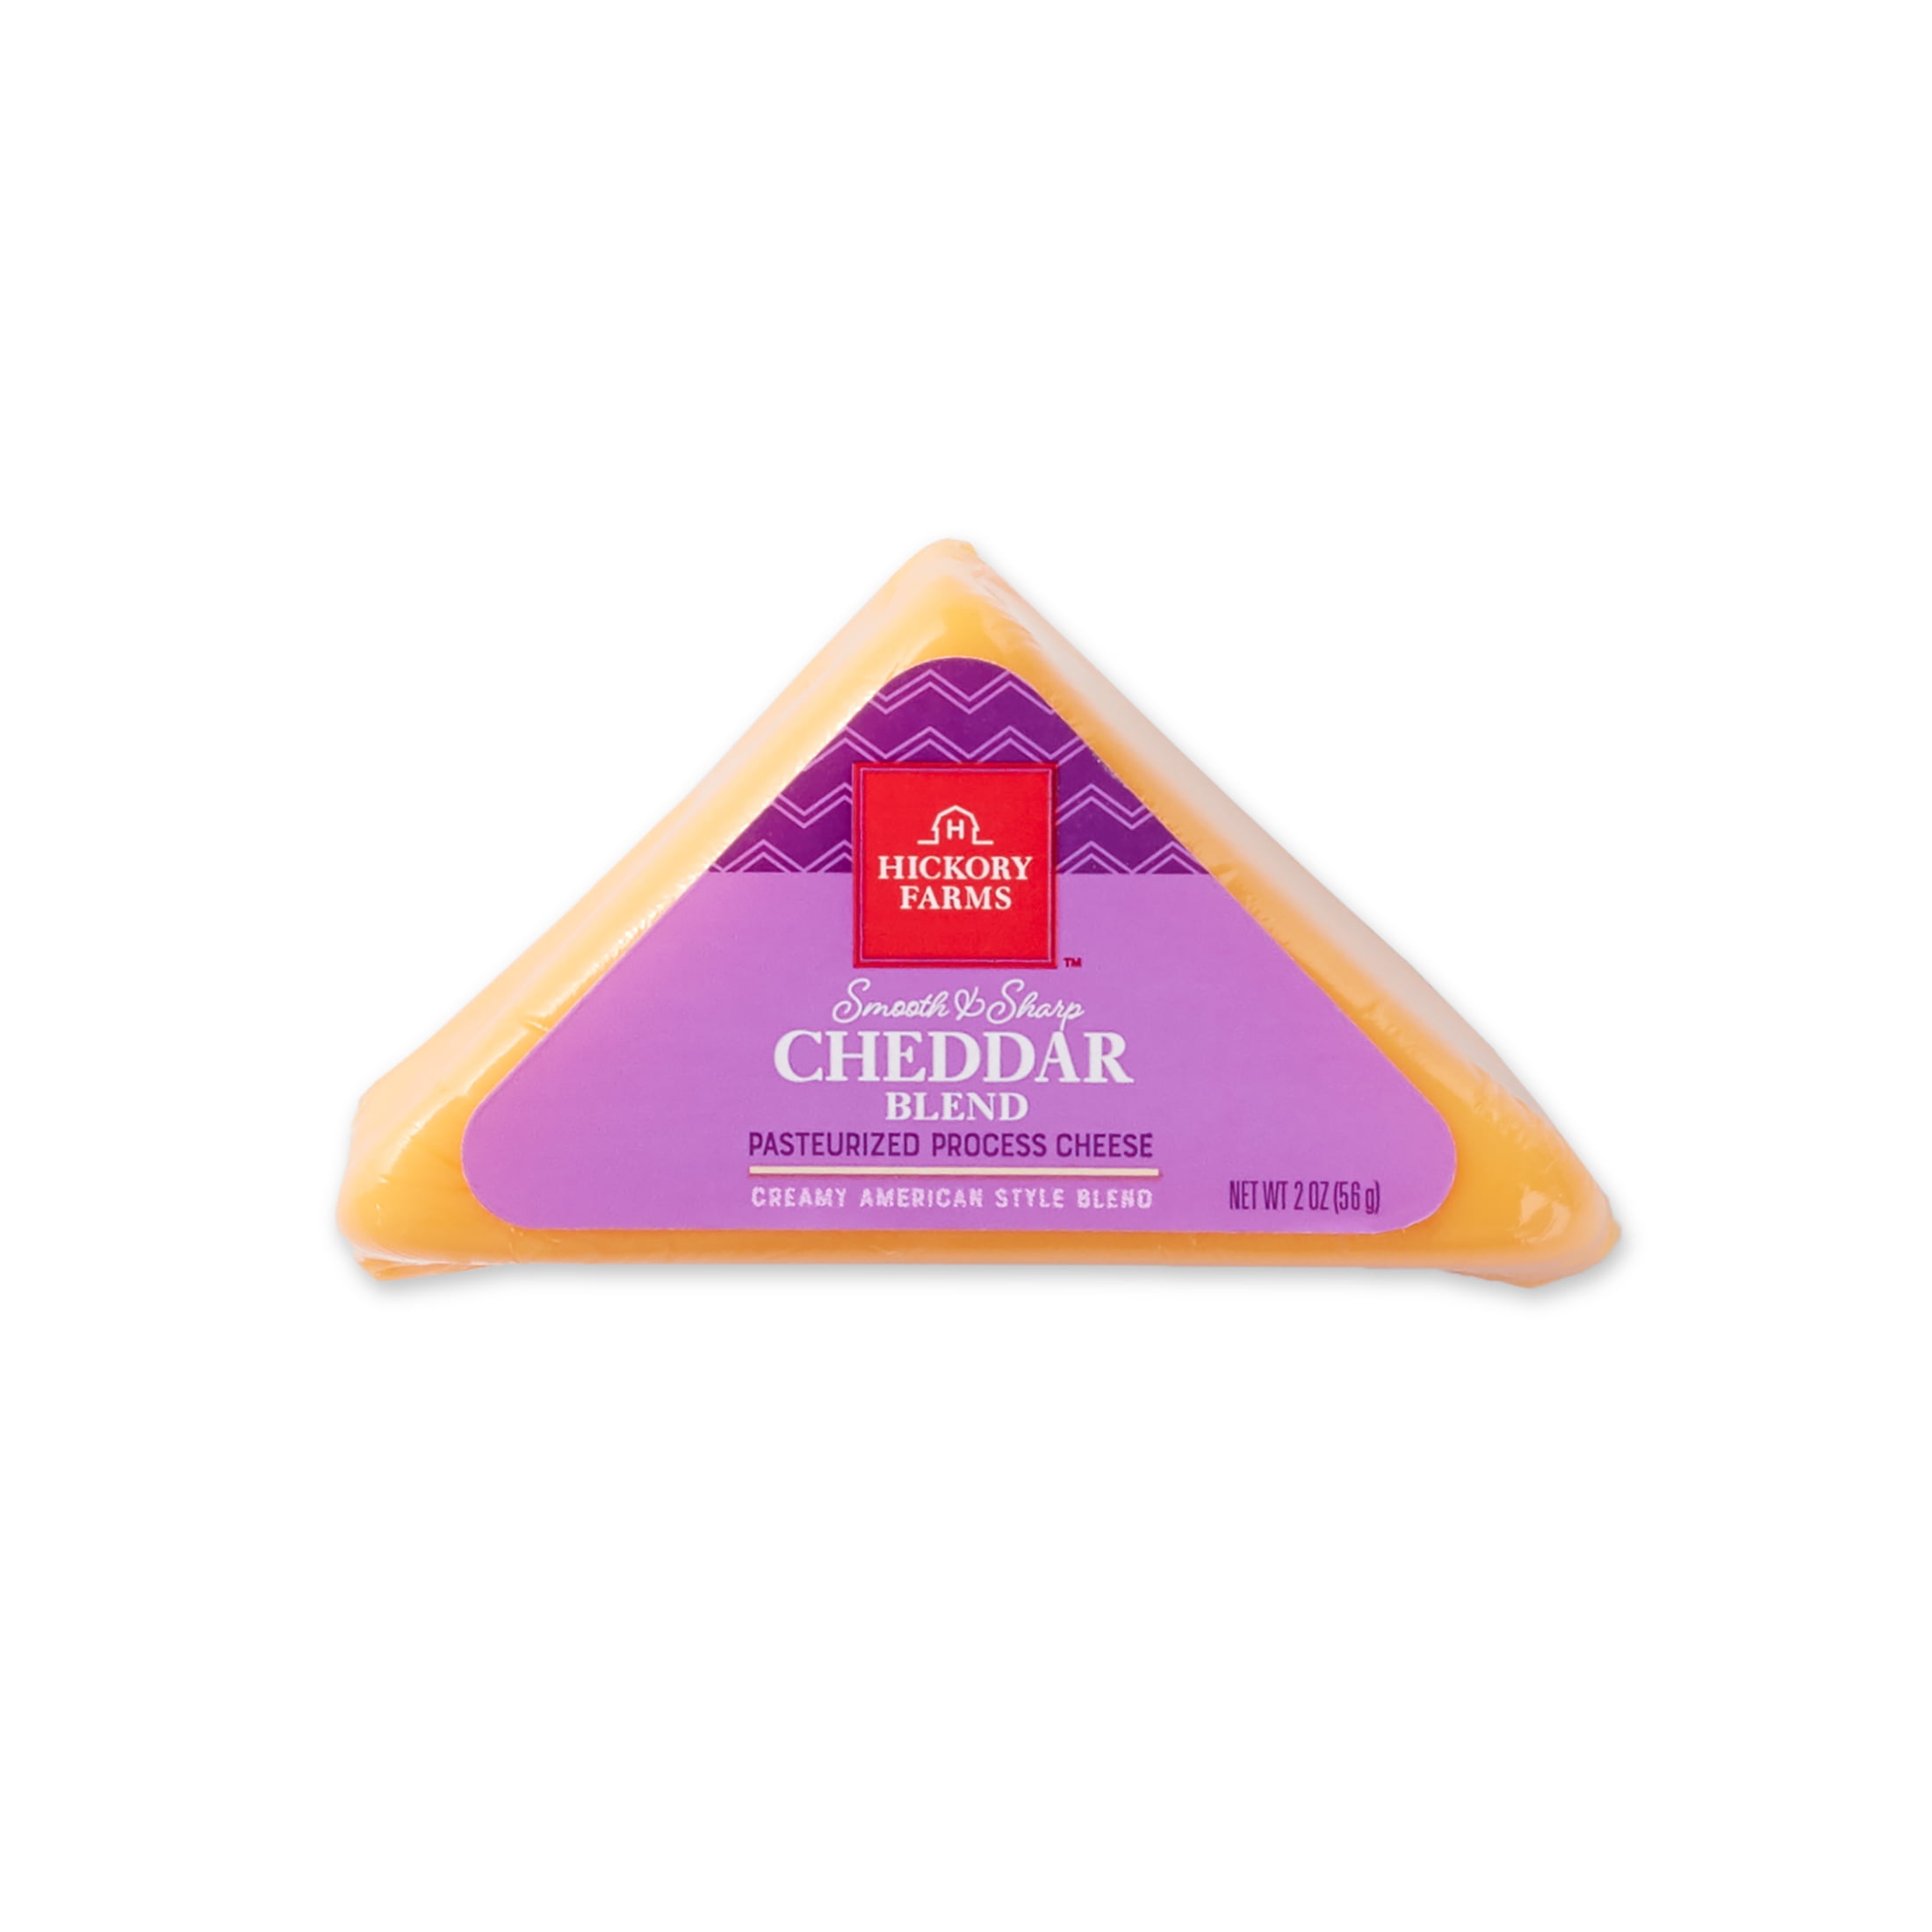 Hickory Farms Smooth & Sharp Cheddar Blend Cheese 2 oz